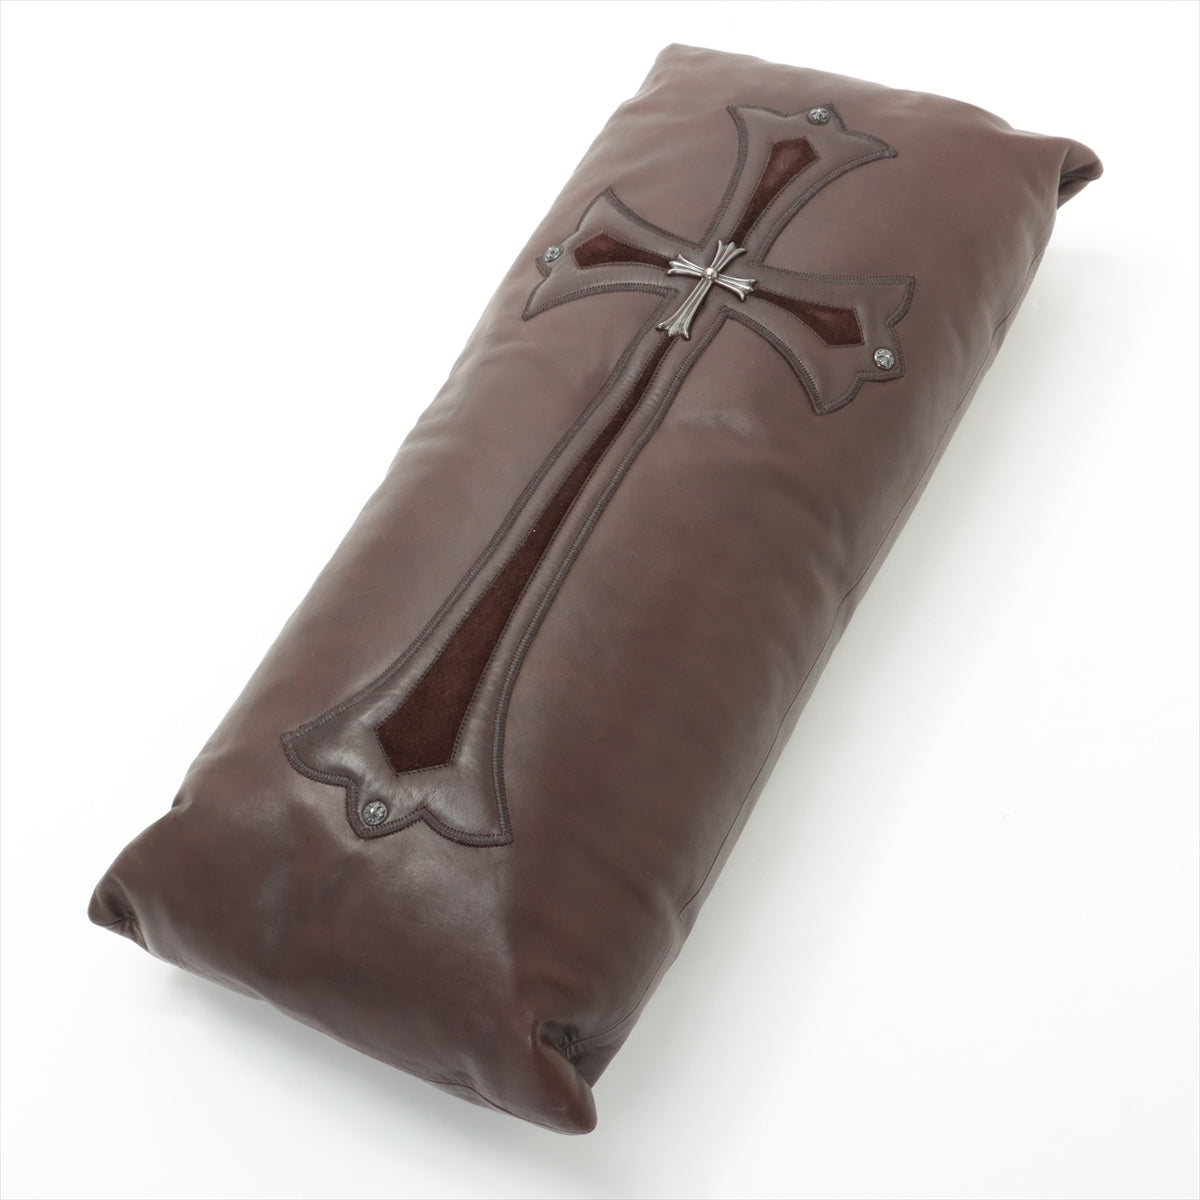 Chrome Hearts CH Cross cushion cover Leather & 925 Brown